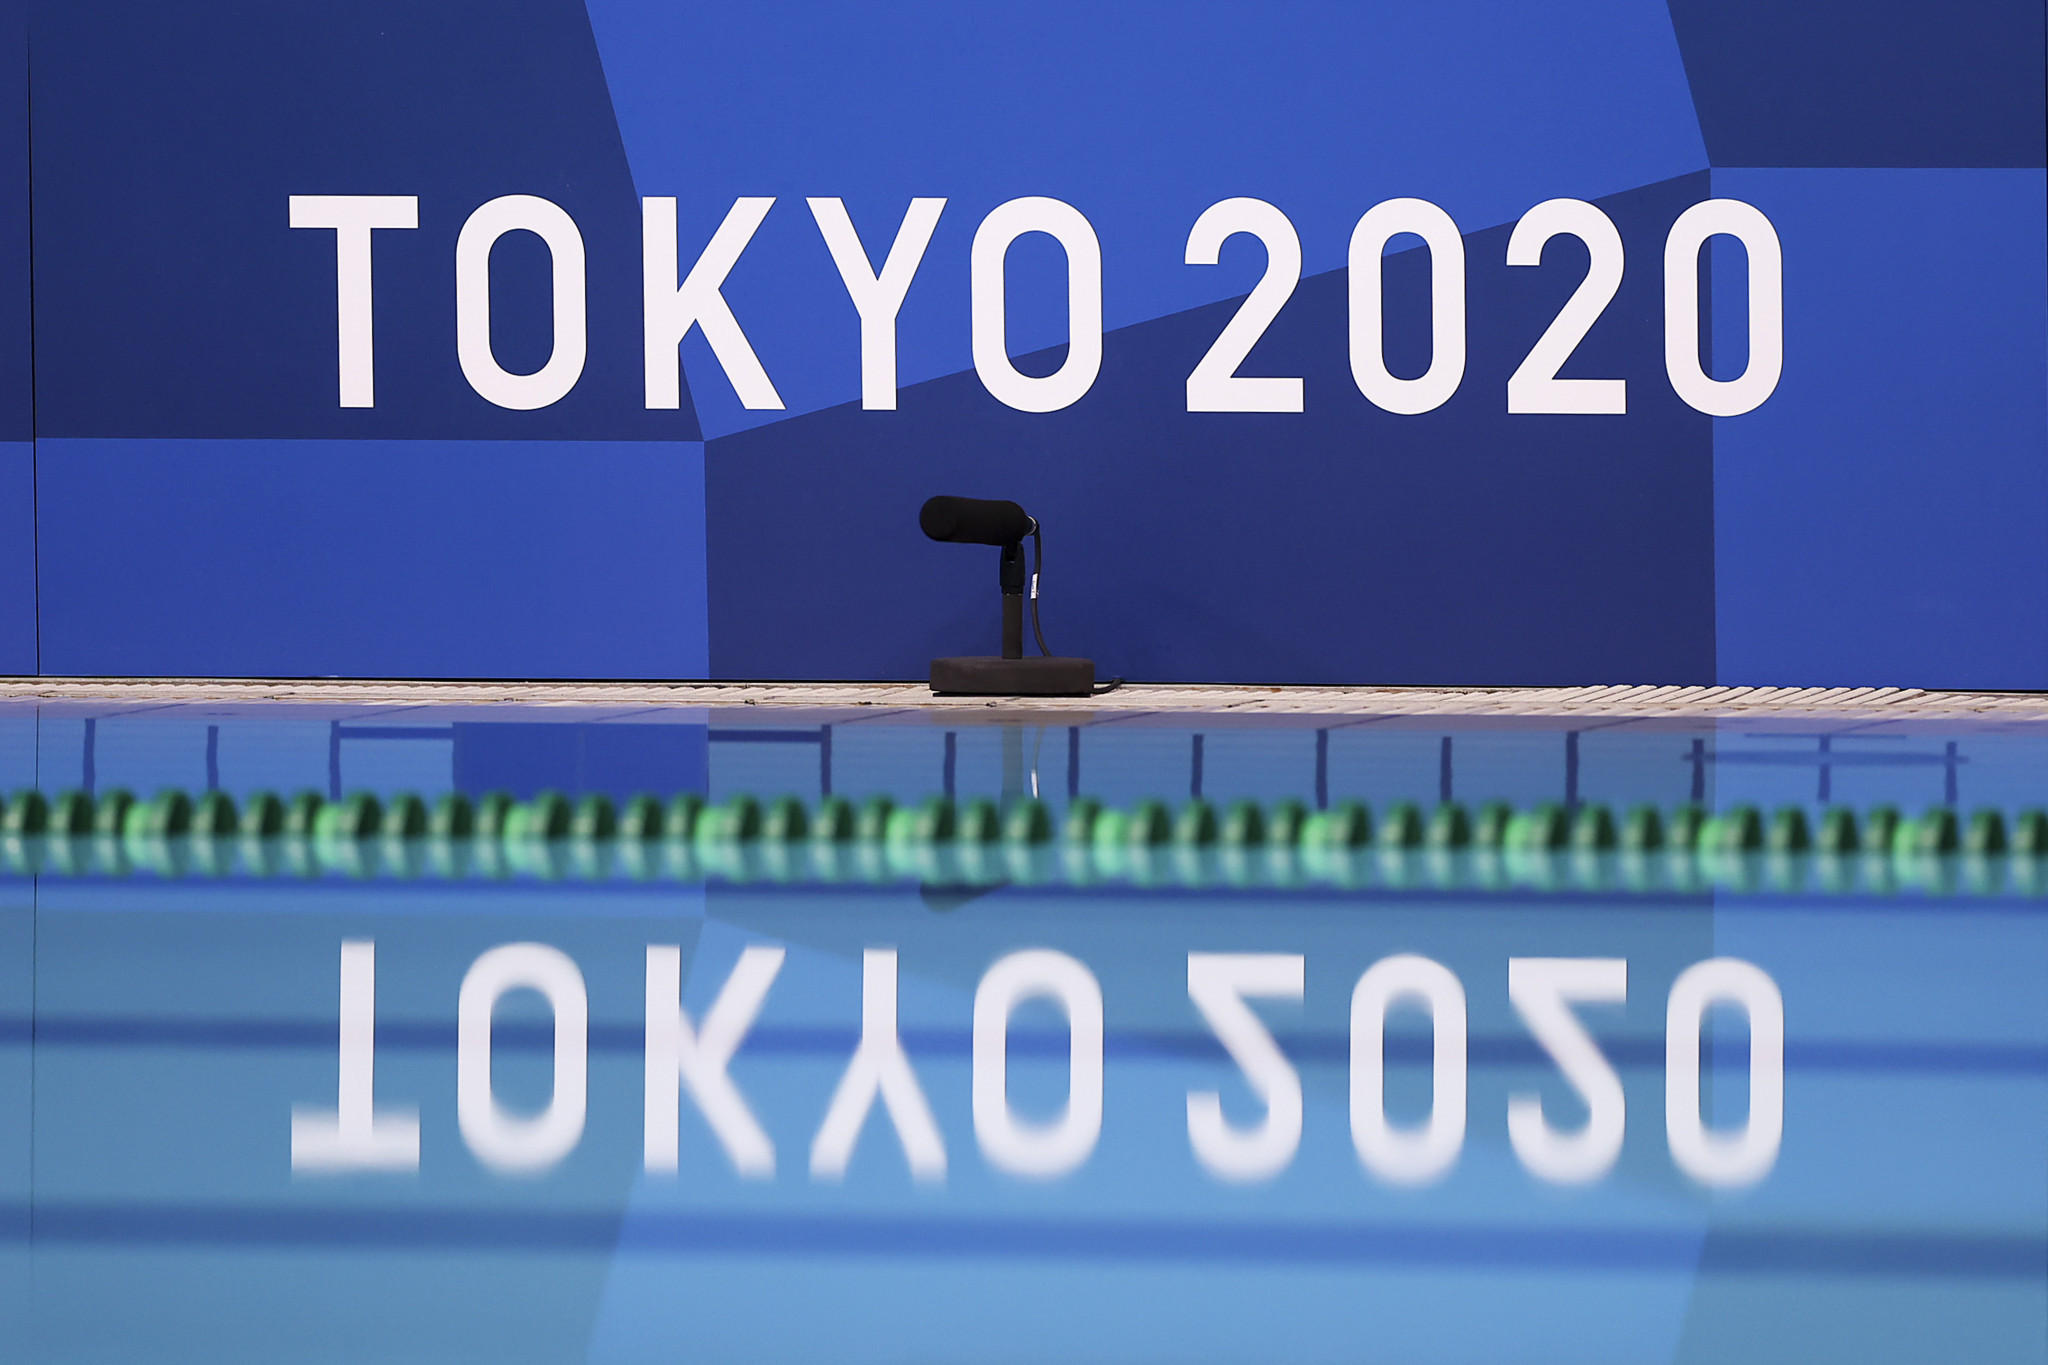 A series of COVID-19 countermeasures are included in Tokyo 2020 playbooks aimed at keeping the Games safe ©Getty Images